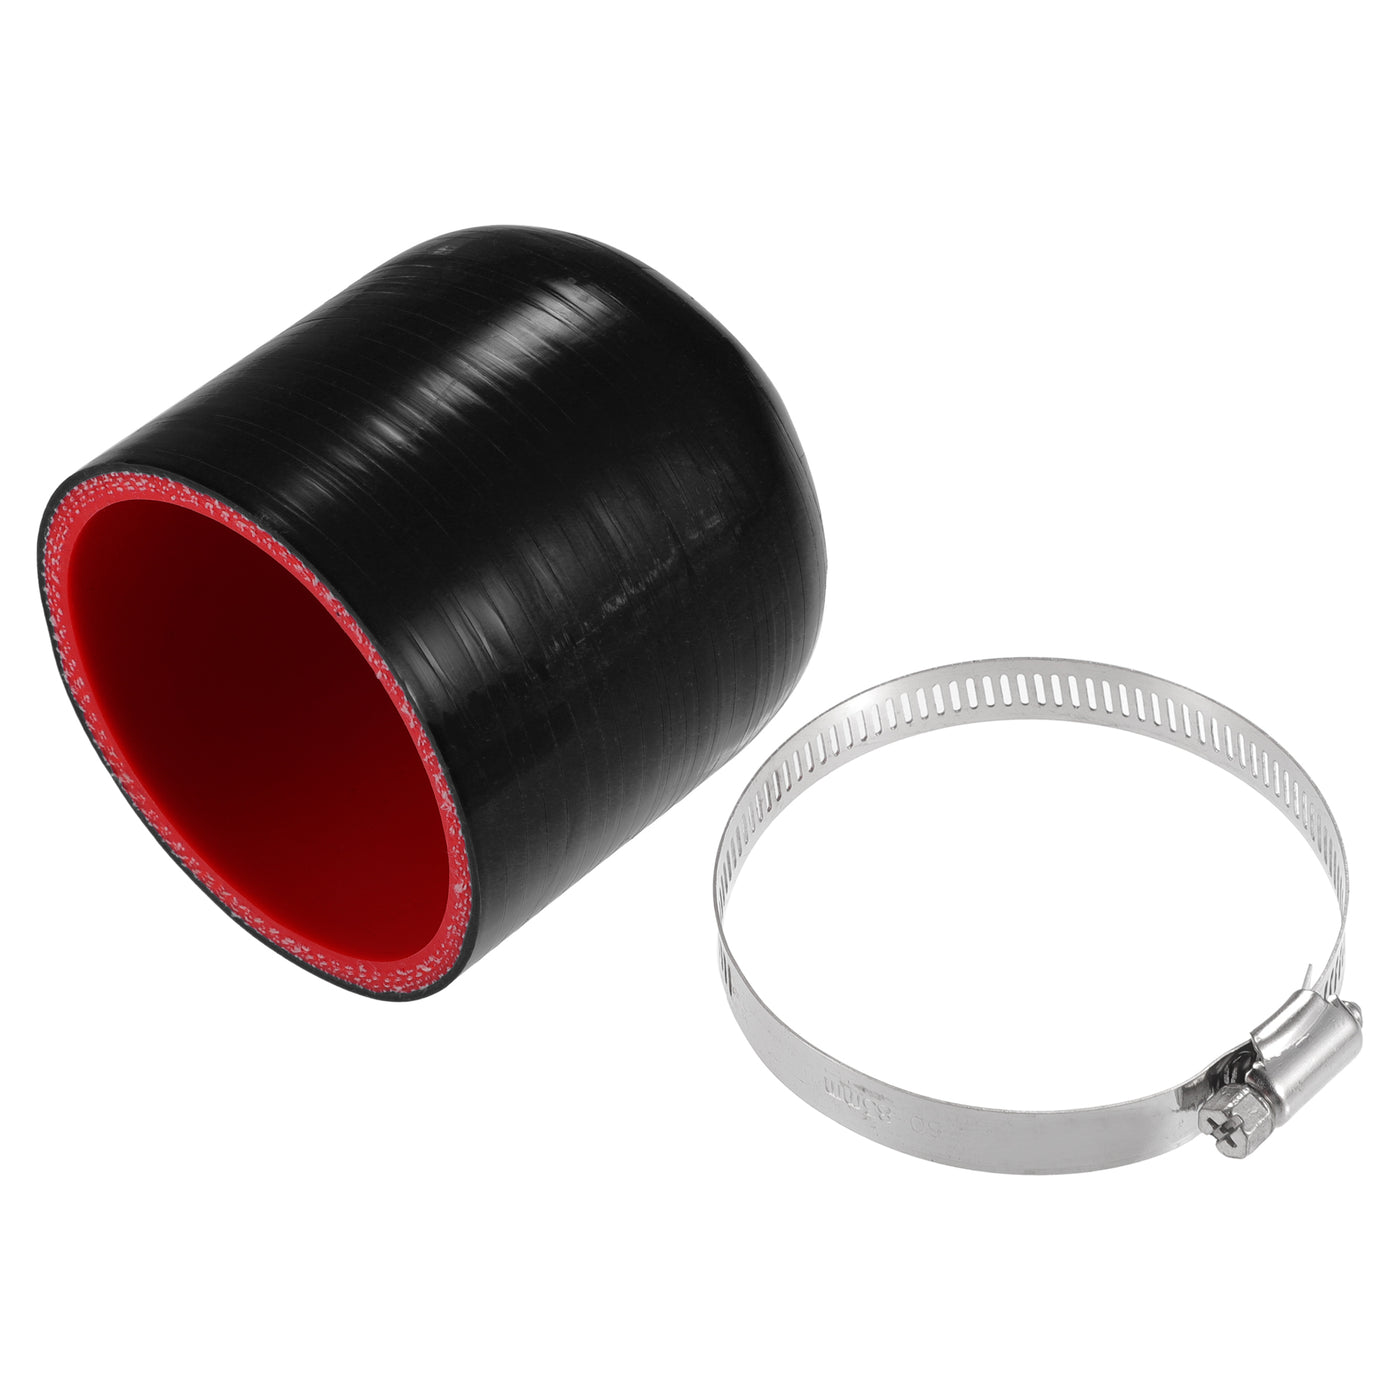 Partuto 1 Set 70mm 2.76" ID Universal Silicone Hose Cap Intake Vacuum Hose End Plug - Car for Coolant Heater Bypass Vacuum Water Port - Silicone Black Red